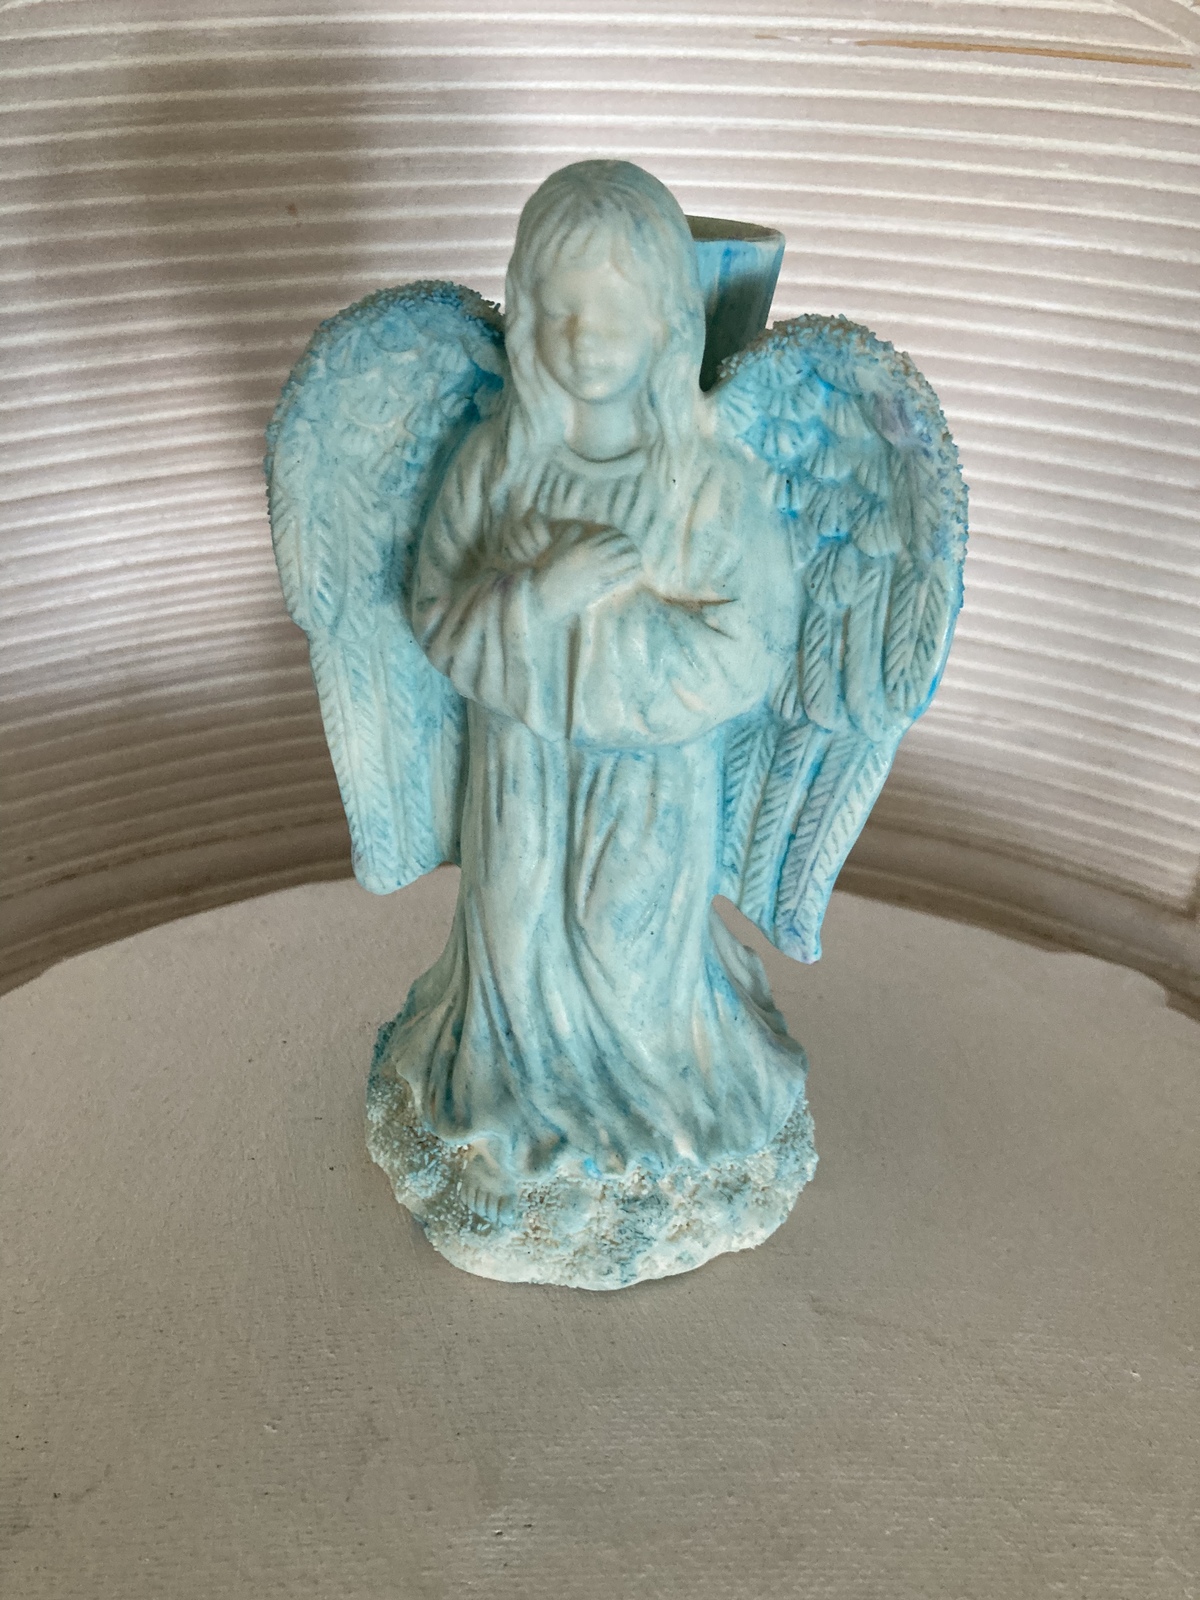 Primary image for Blue  angel figurine ceramic candle holder approximately  6"